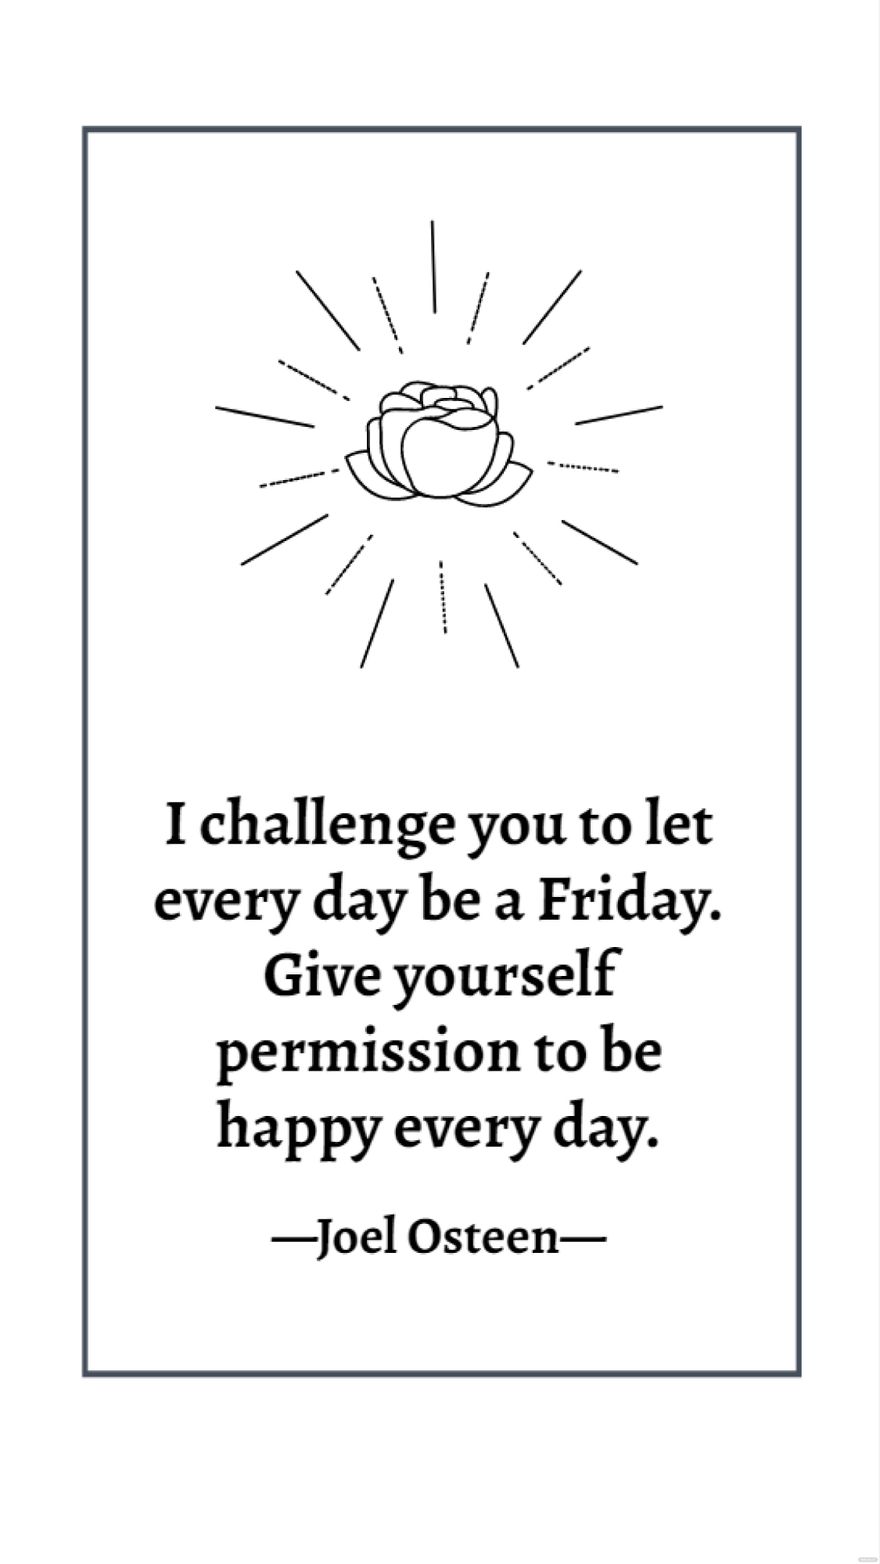 Joel Osteen - I challenge you to let every day be a Friday. Give yourself permission to be happy every day.